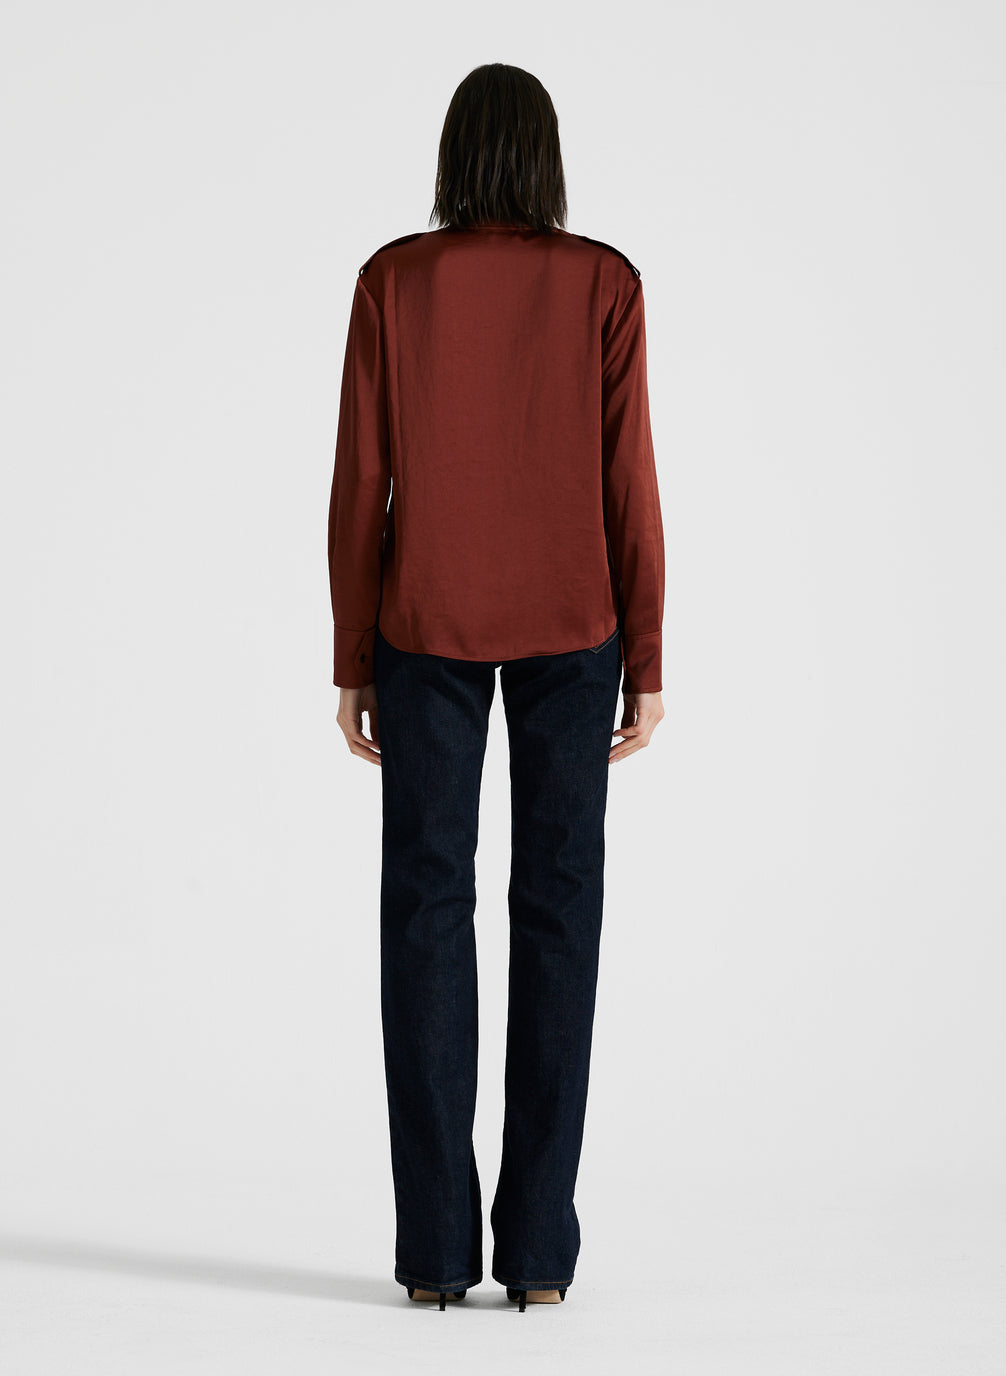 back view of woman wearing maroon satin long sleeve top and black pants